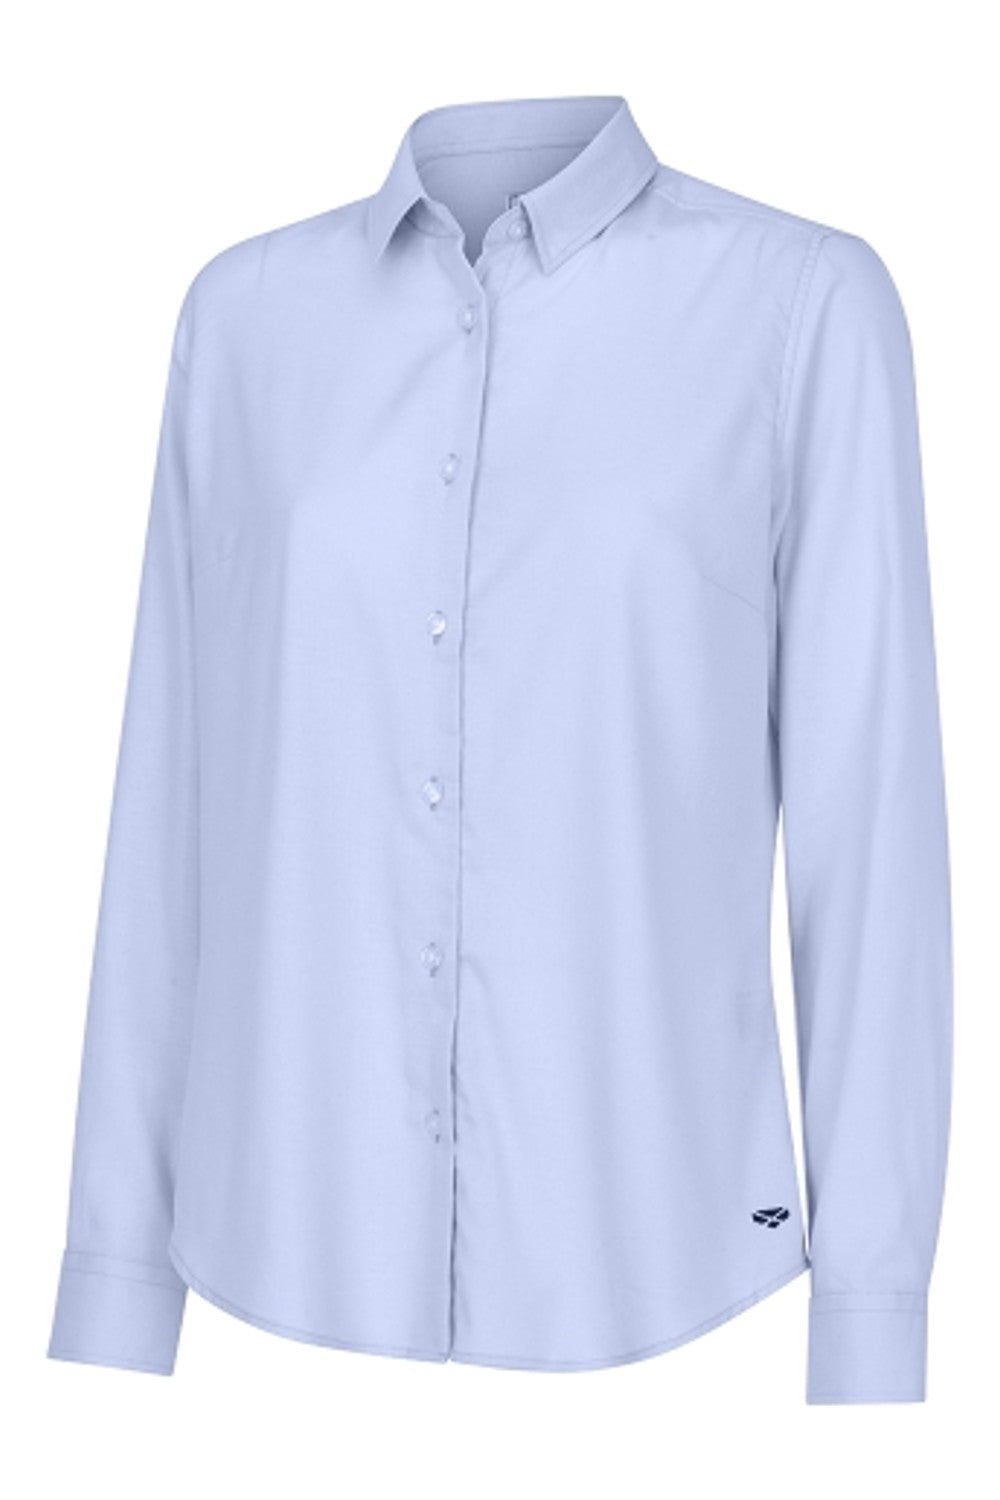 Hoggs of Fife Callie Twill Ladies Check Shirt in Blue 